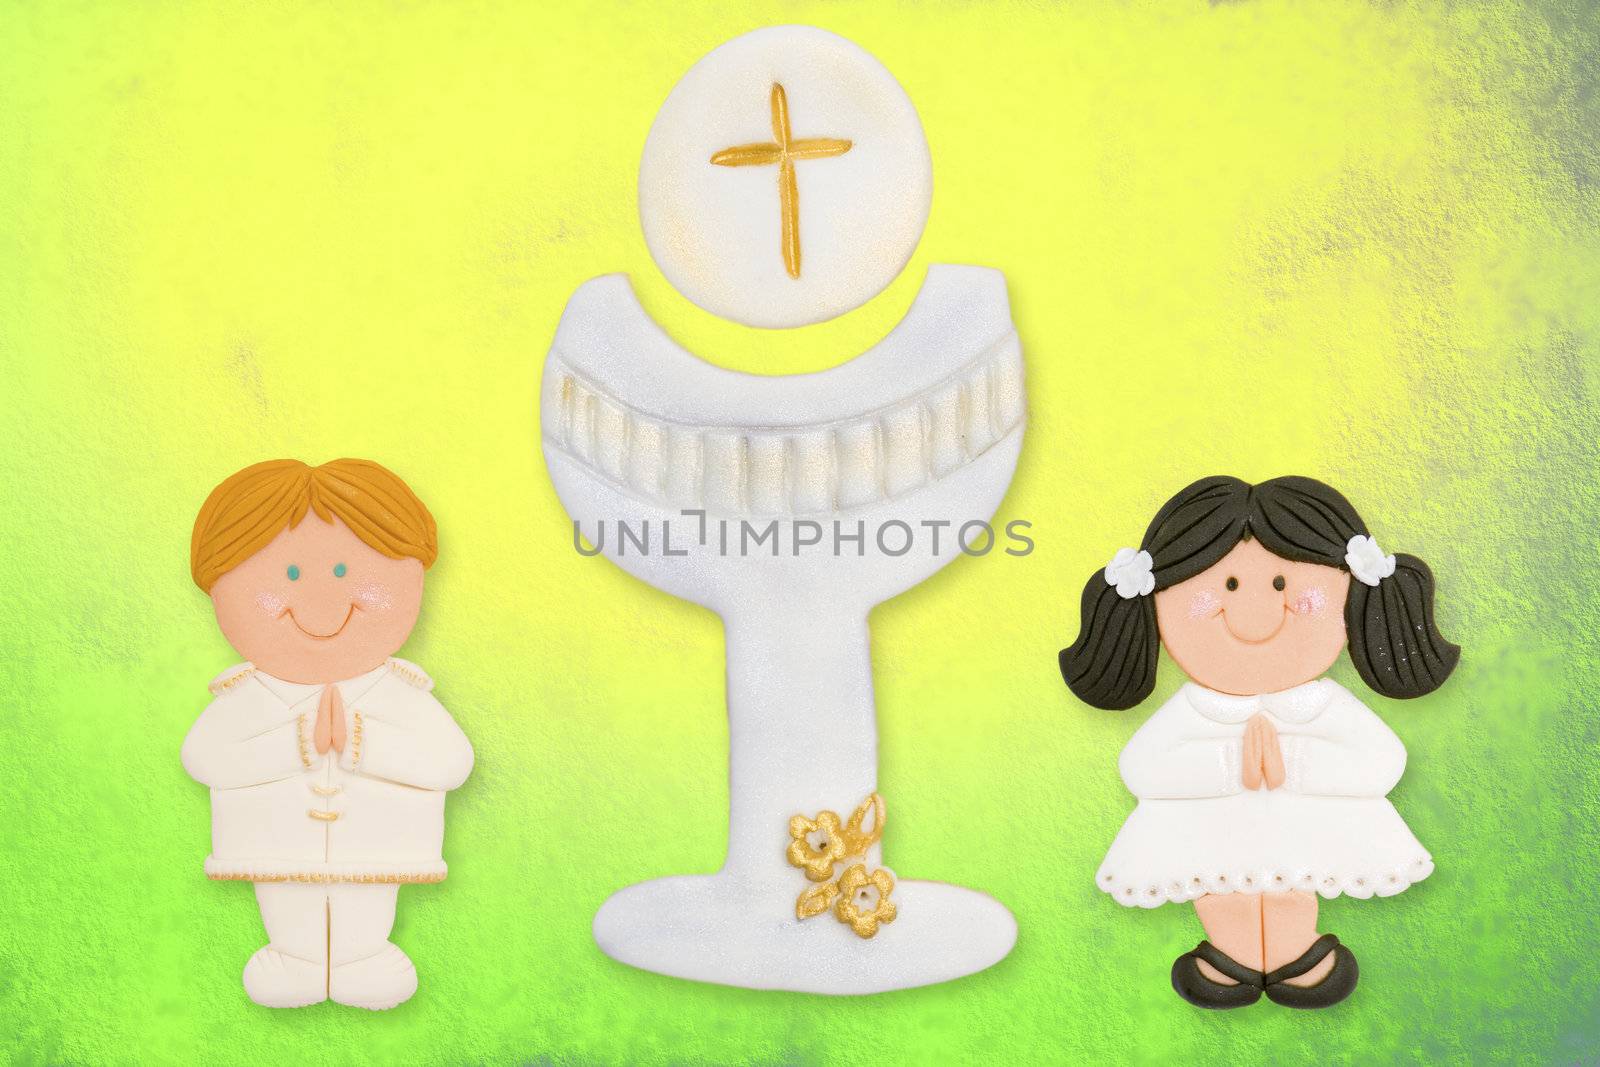 first communion card funny, dark-haired girl and blond boy chalice